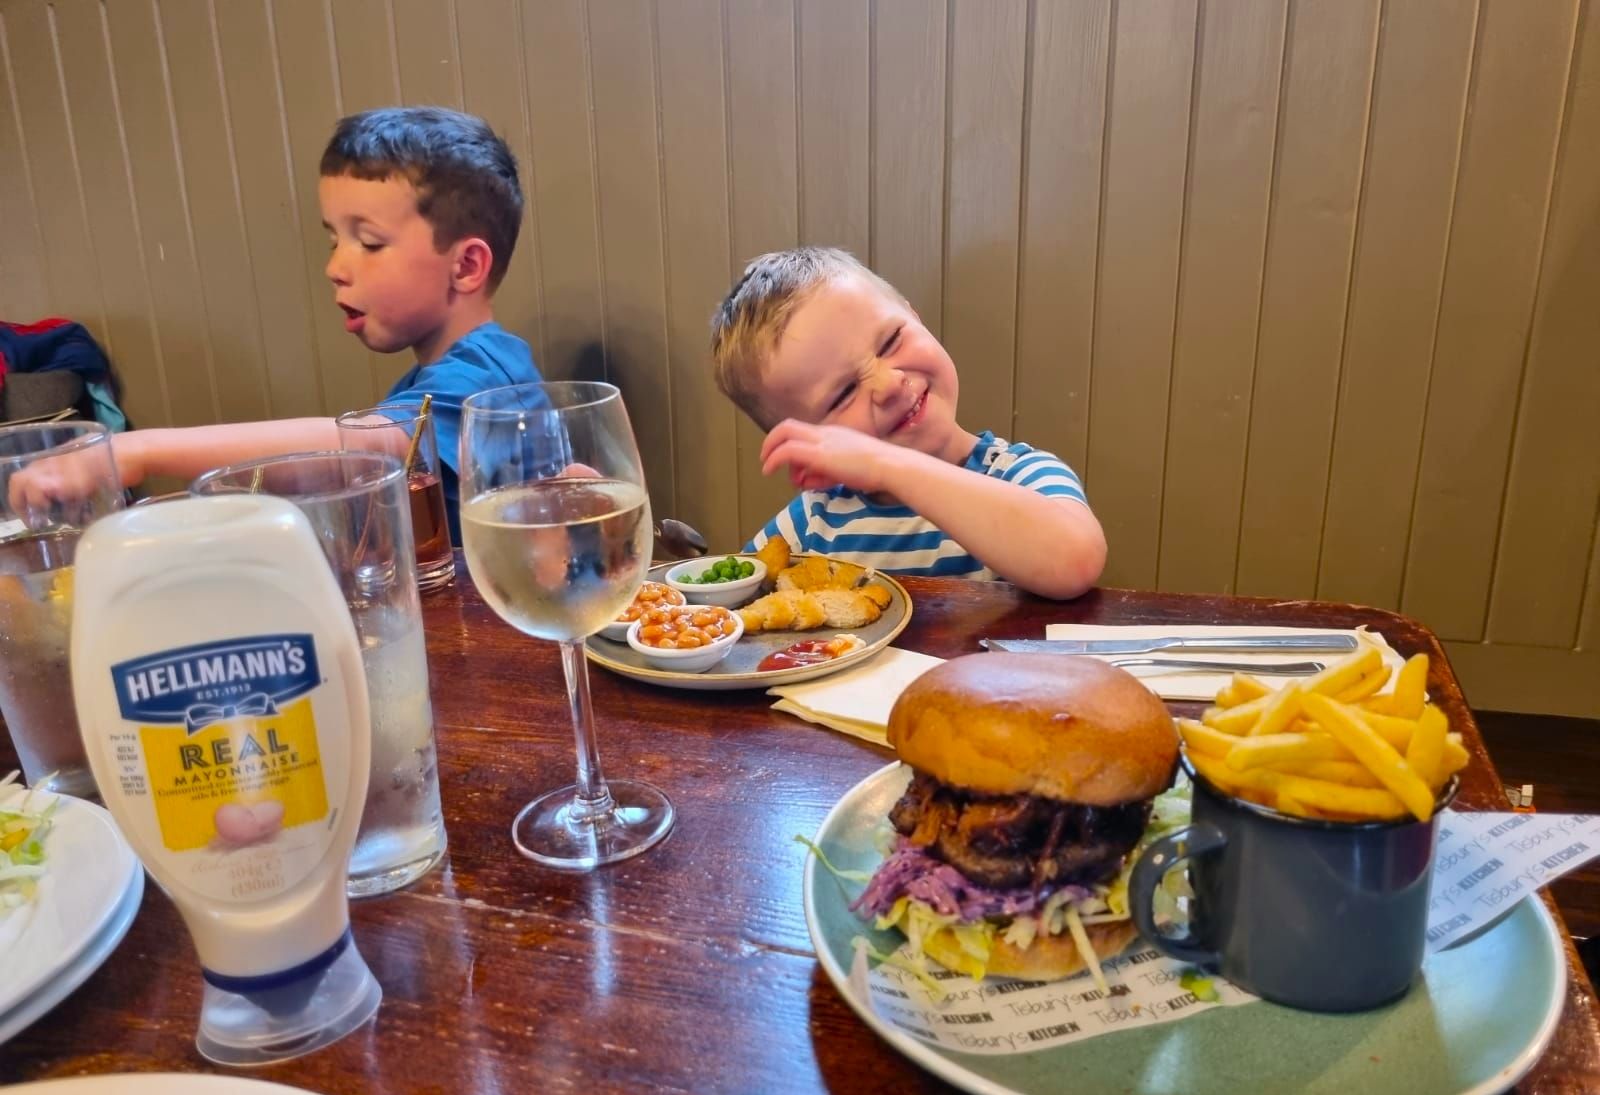 two kids enjoying their burger and fries at the table, their is glass of water and bottle of mayo on the table too